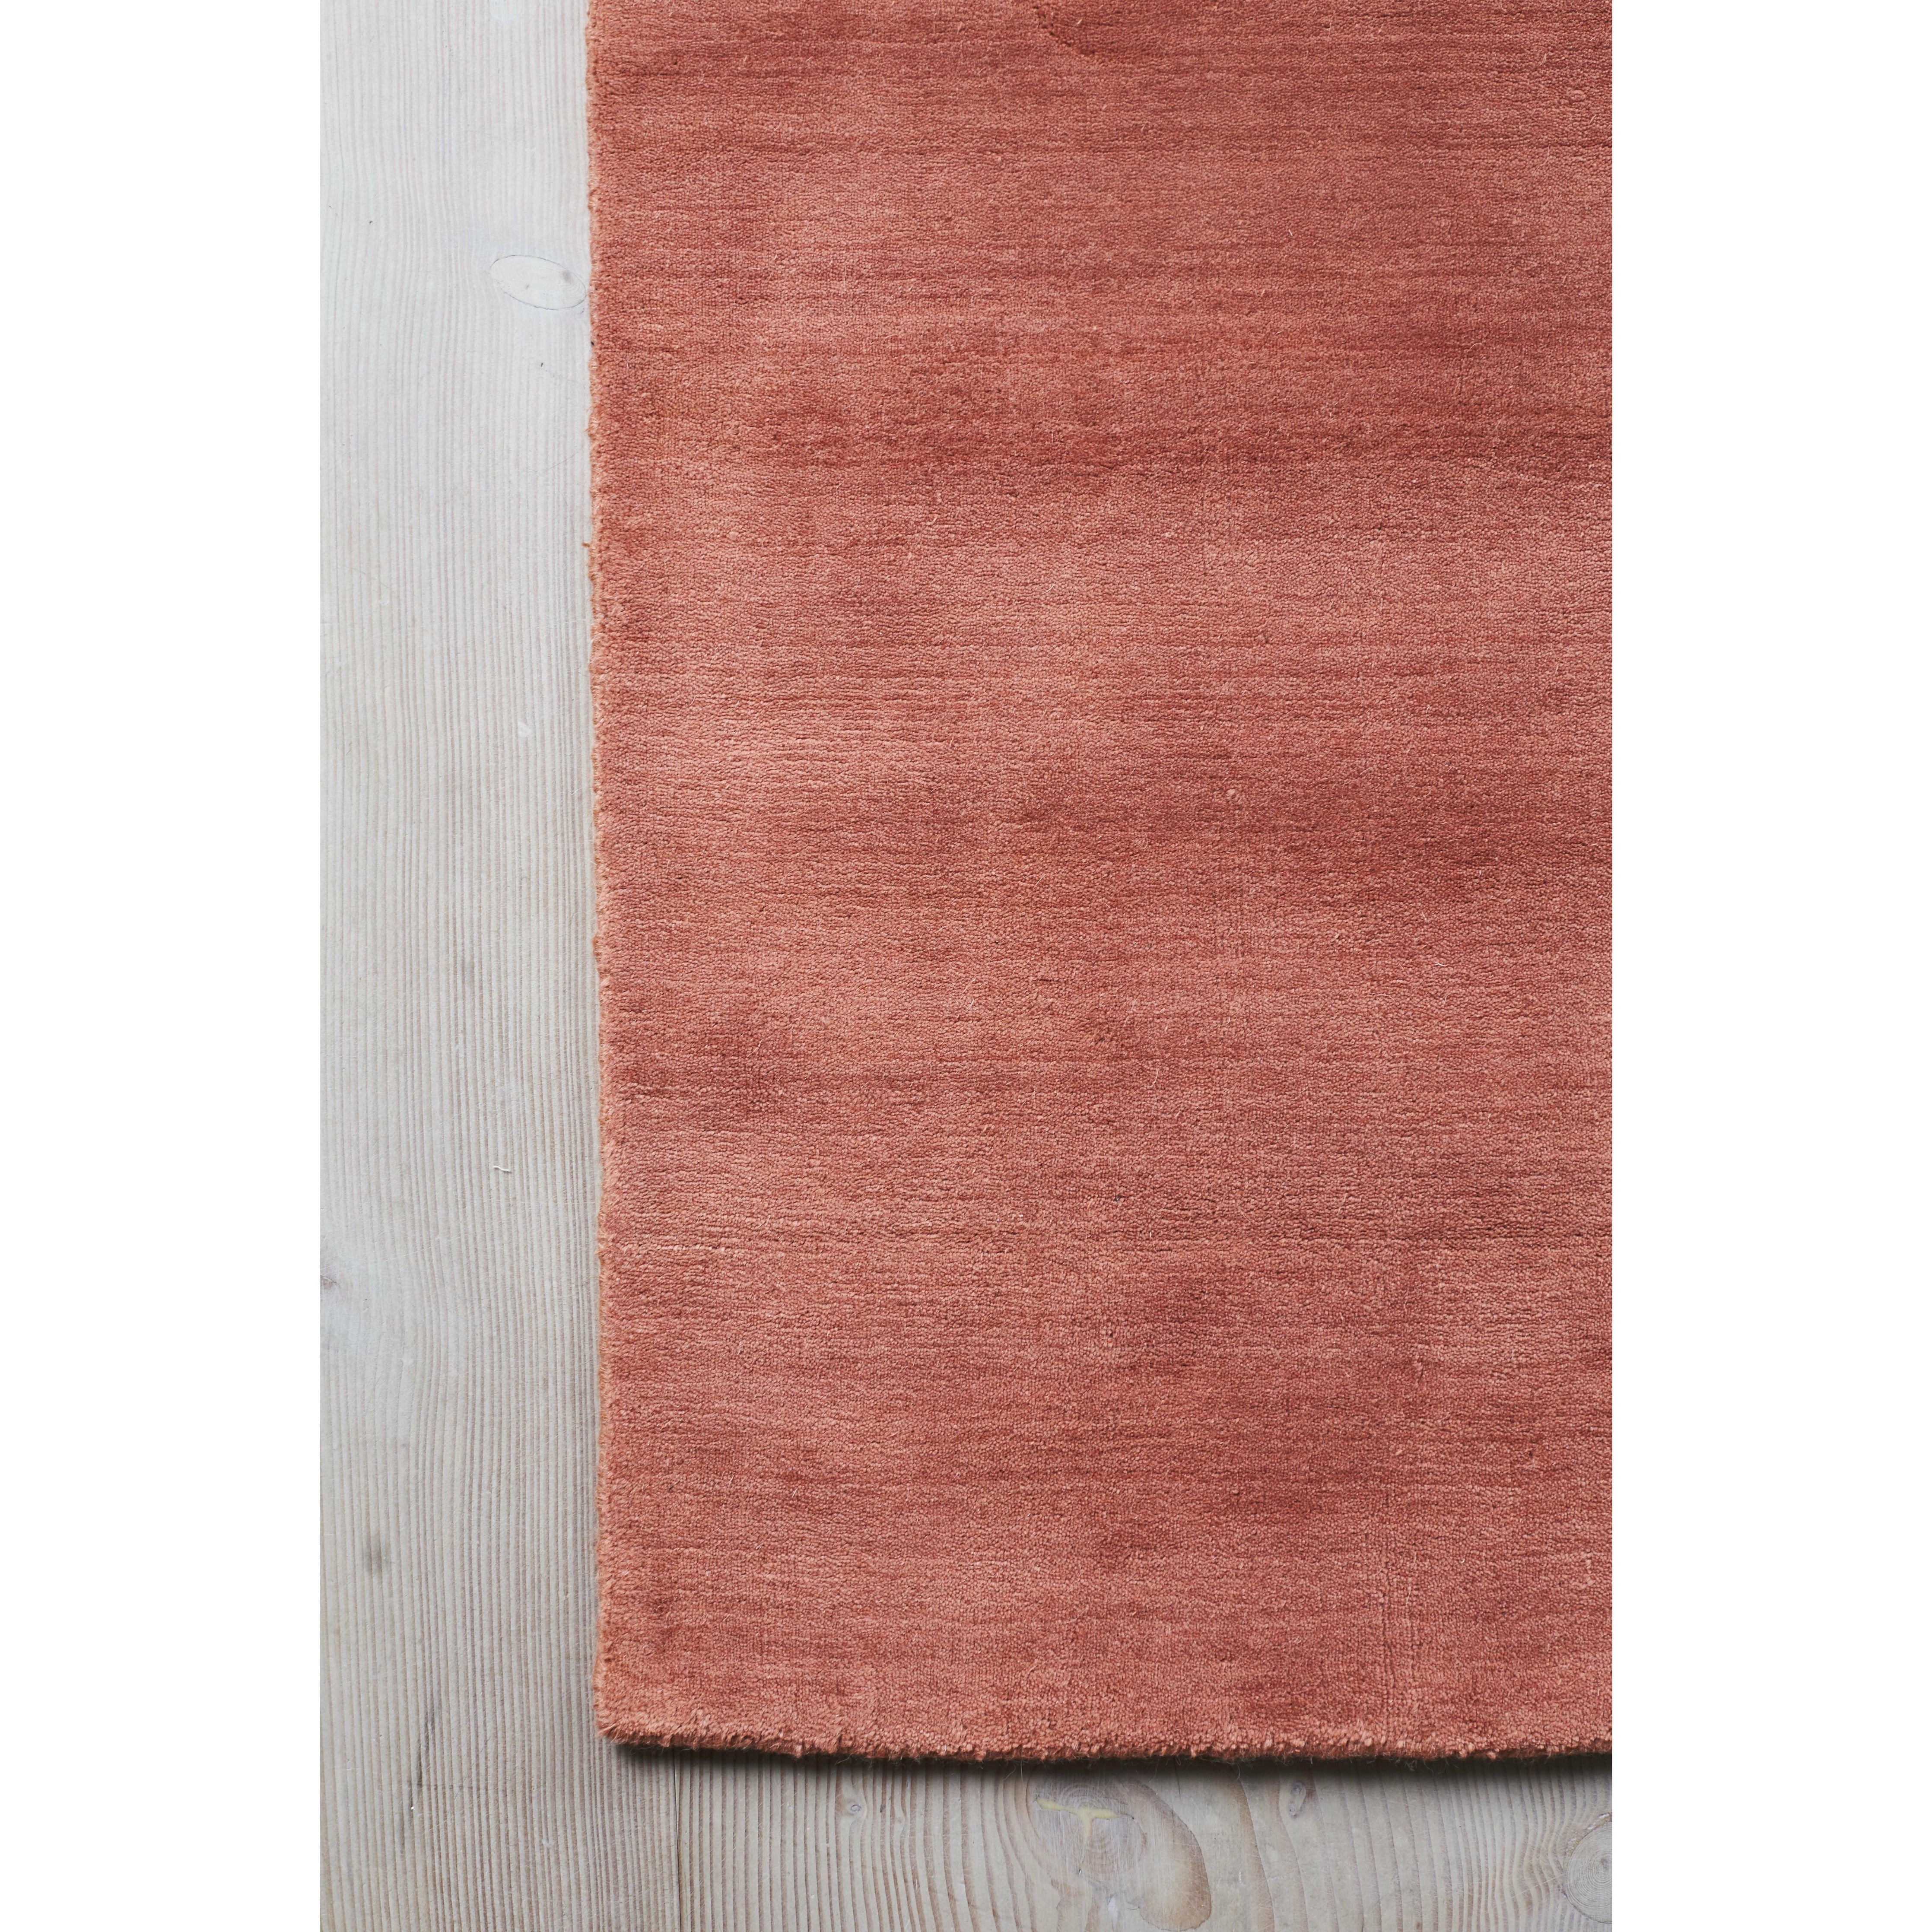 Massimo Earth Tapis Bambou Terre Cuite, 250x300 Cm